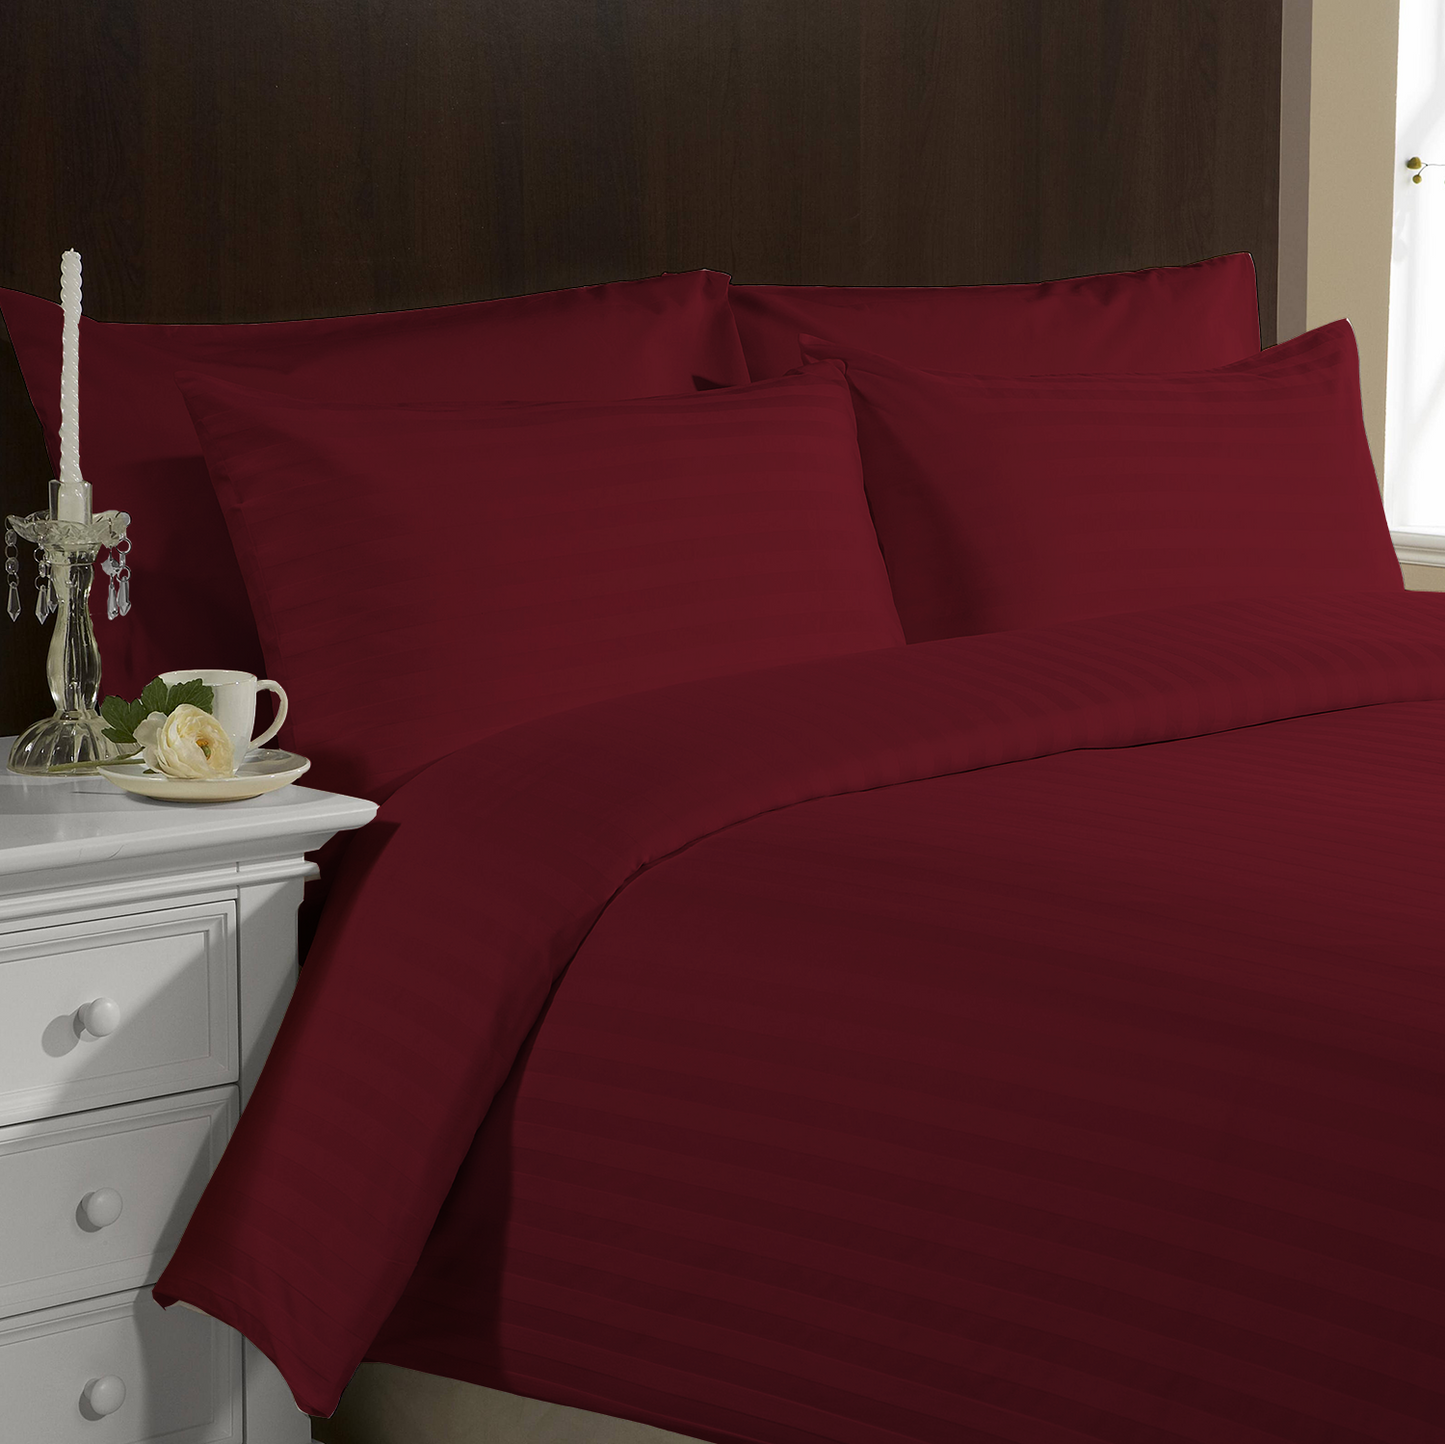 Red & Maroon Hotel Stripes Beddings